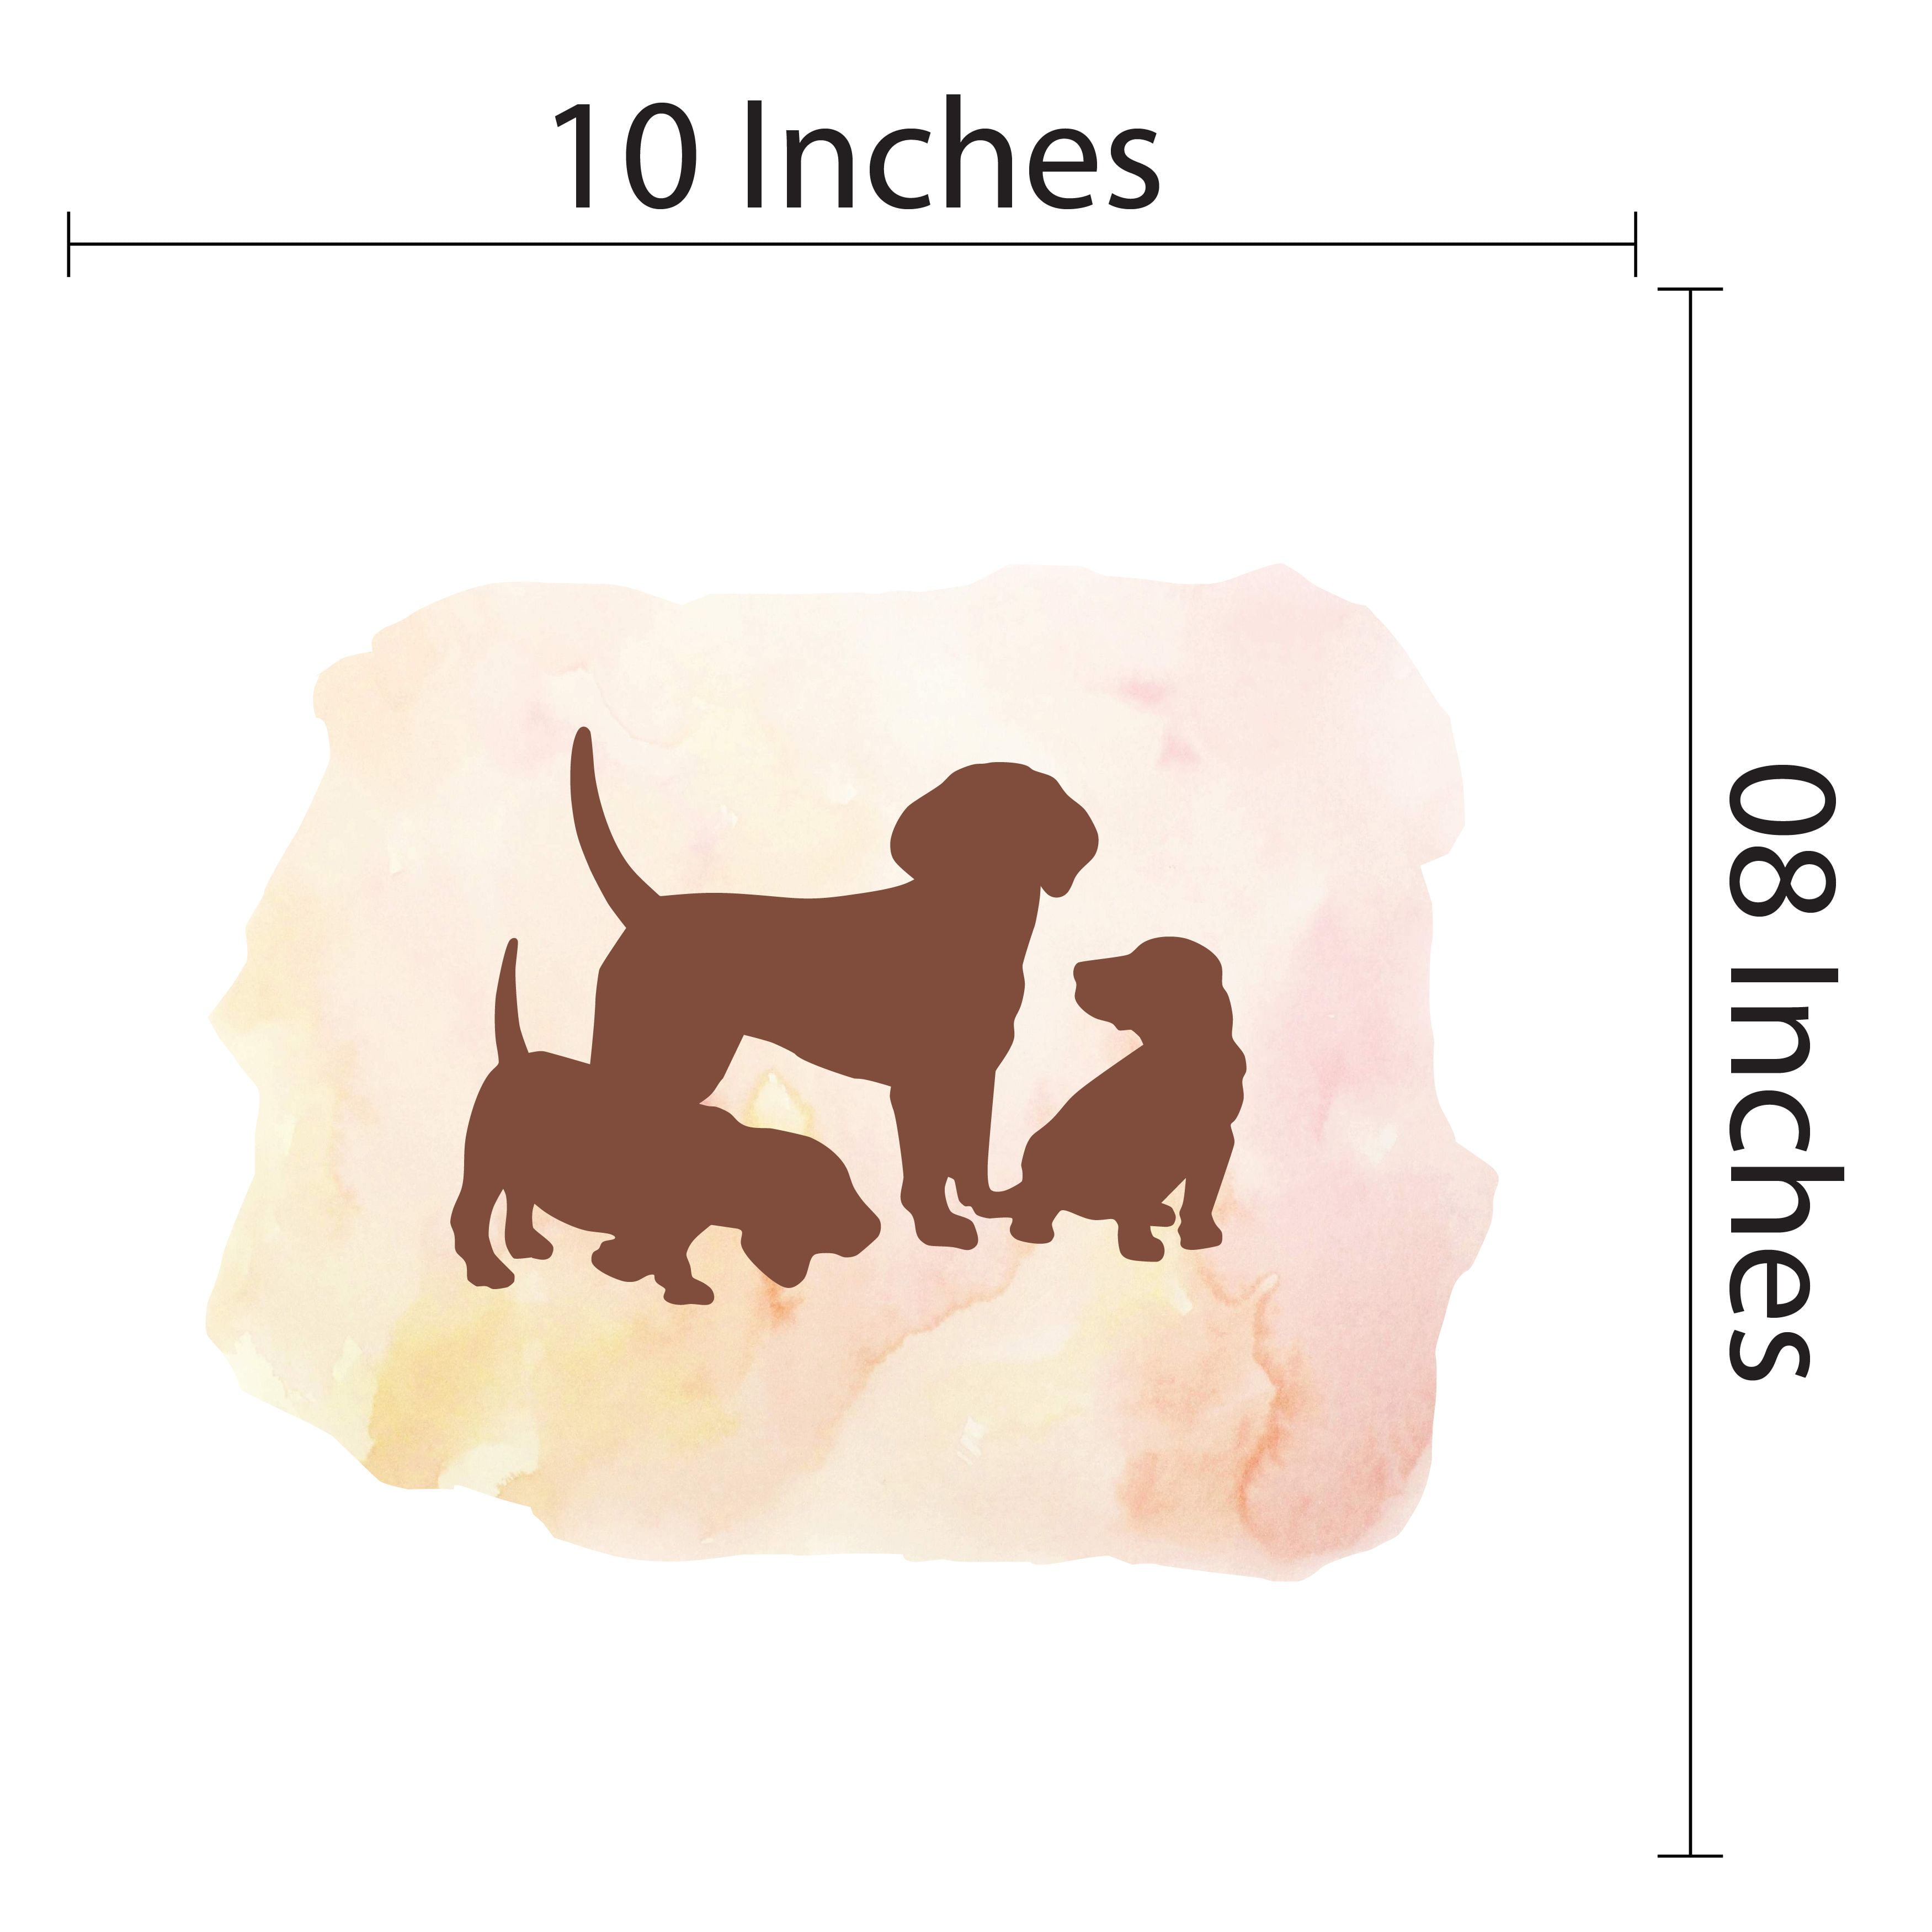 Animal Wall Decals For Care Taker Daycare Cute Loving Dog Family Dog DIY  Creativity Boy Girl Bedroom Wall Sticker Size: 10 In X In